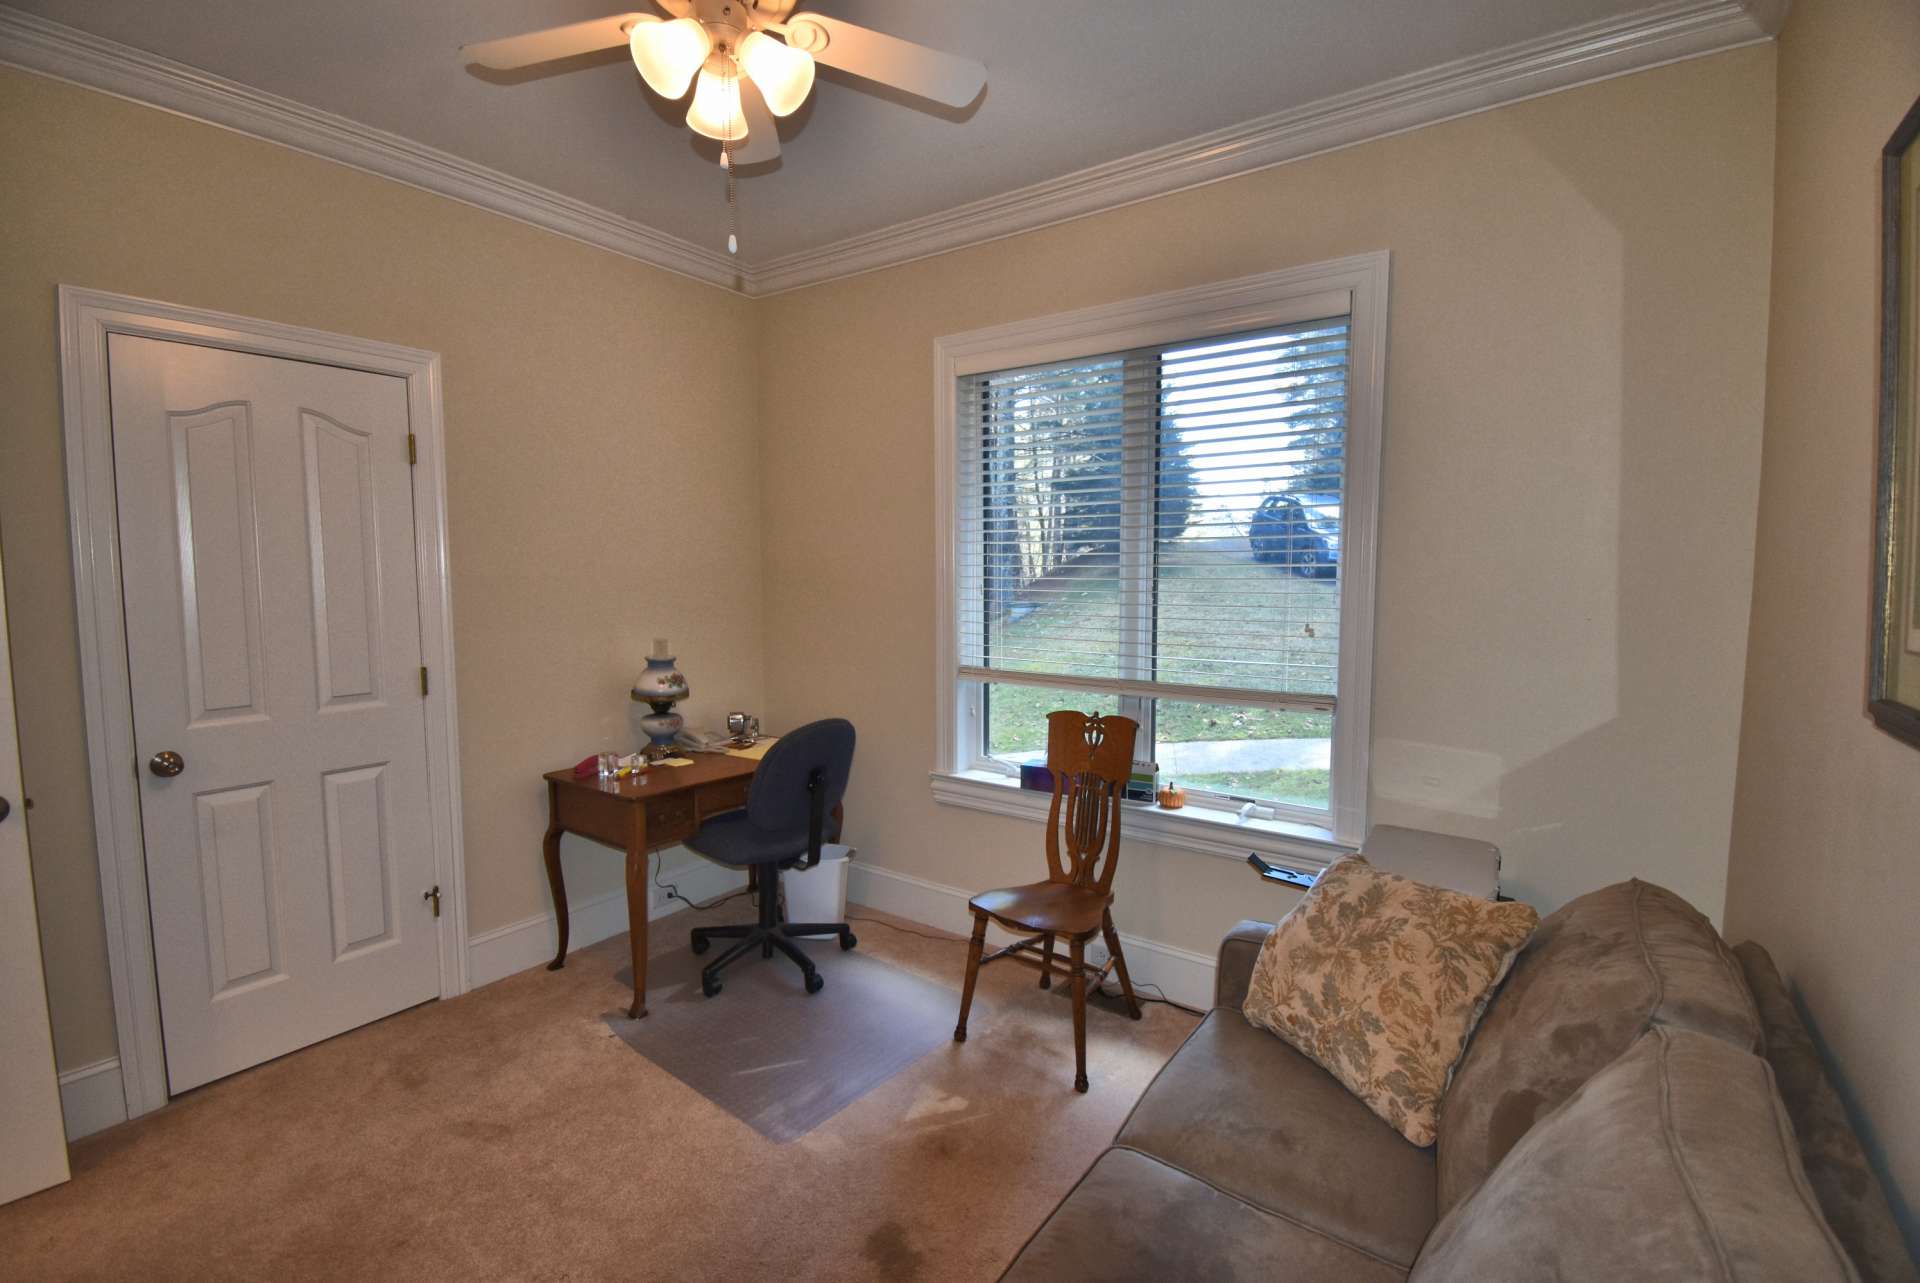 The current owners utilize the second guest bedroom as a home office.  All bedrooms feature comfortable carpeted floors.